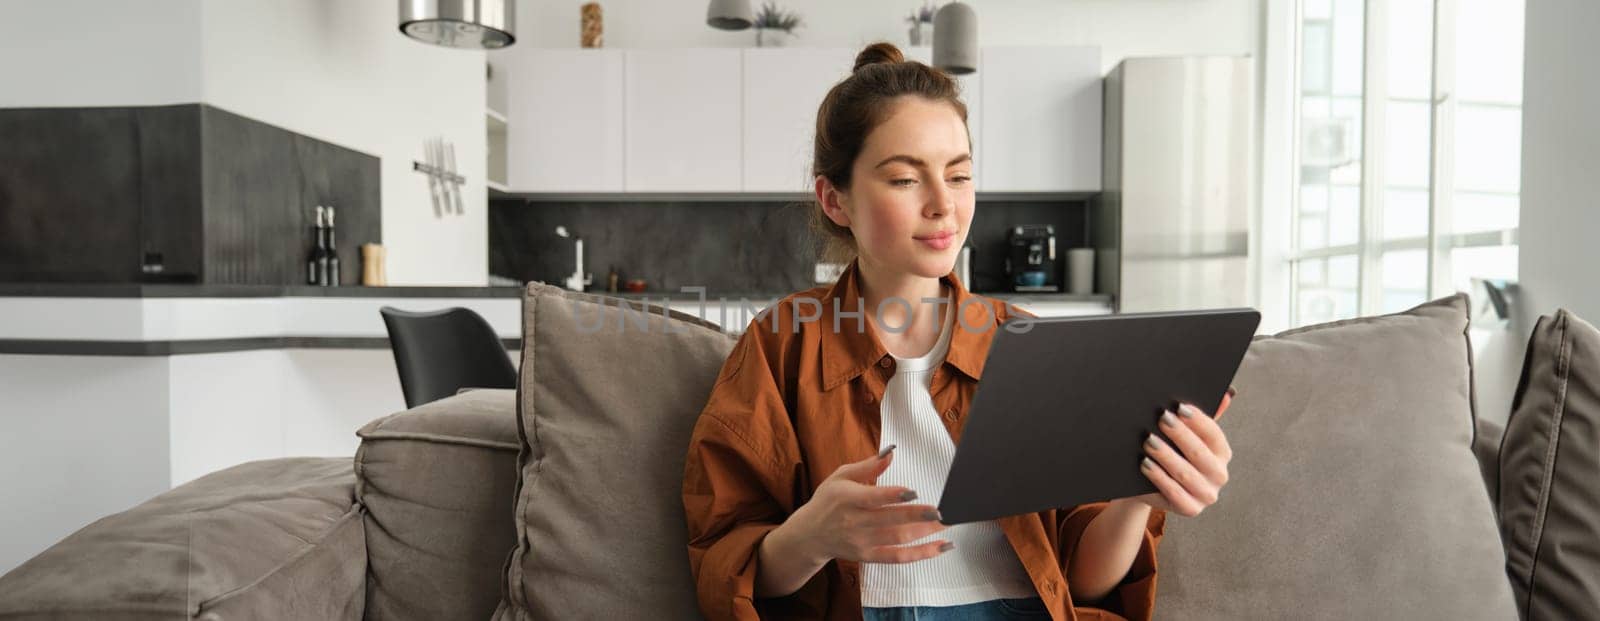 Portrait of female model reading on digital tablet e-book, watching tv series on her gadget application, sitting in living room at home.